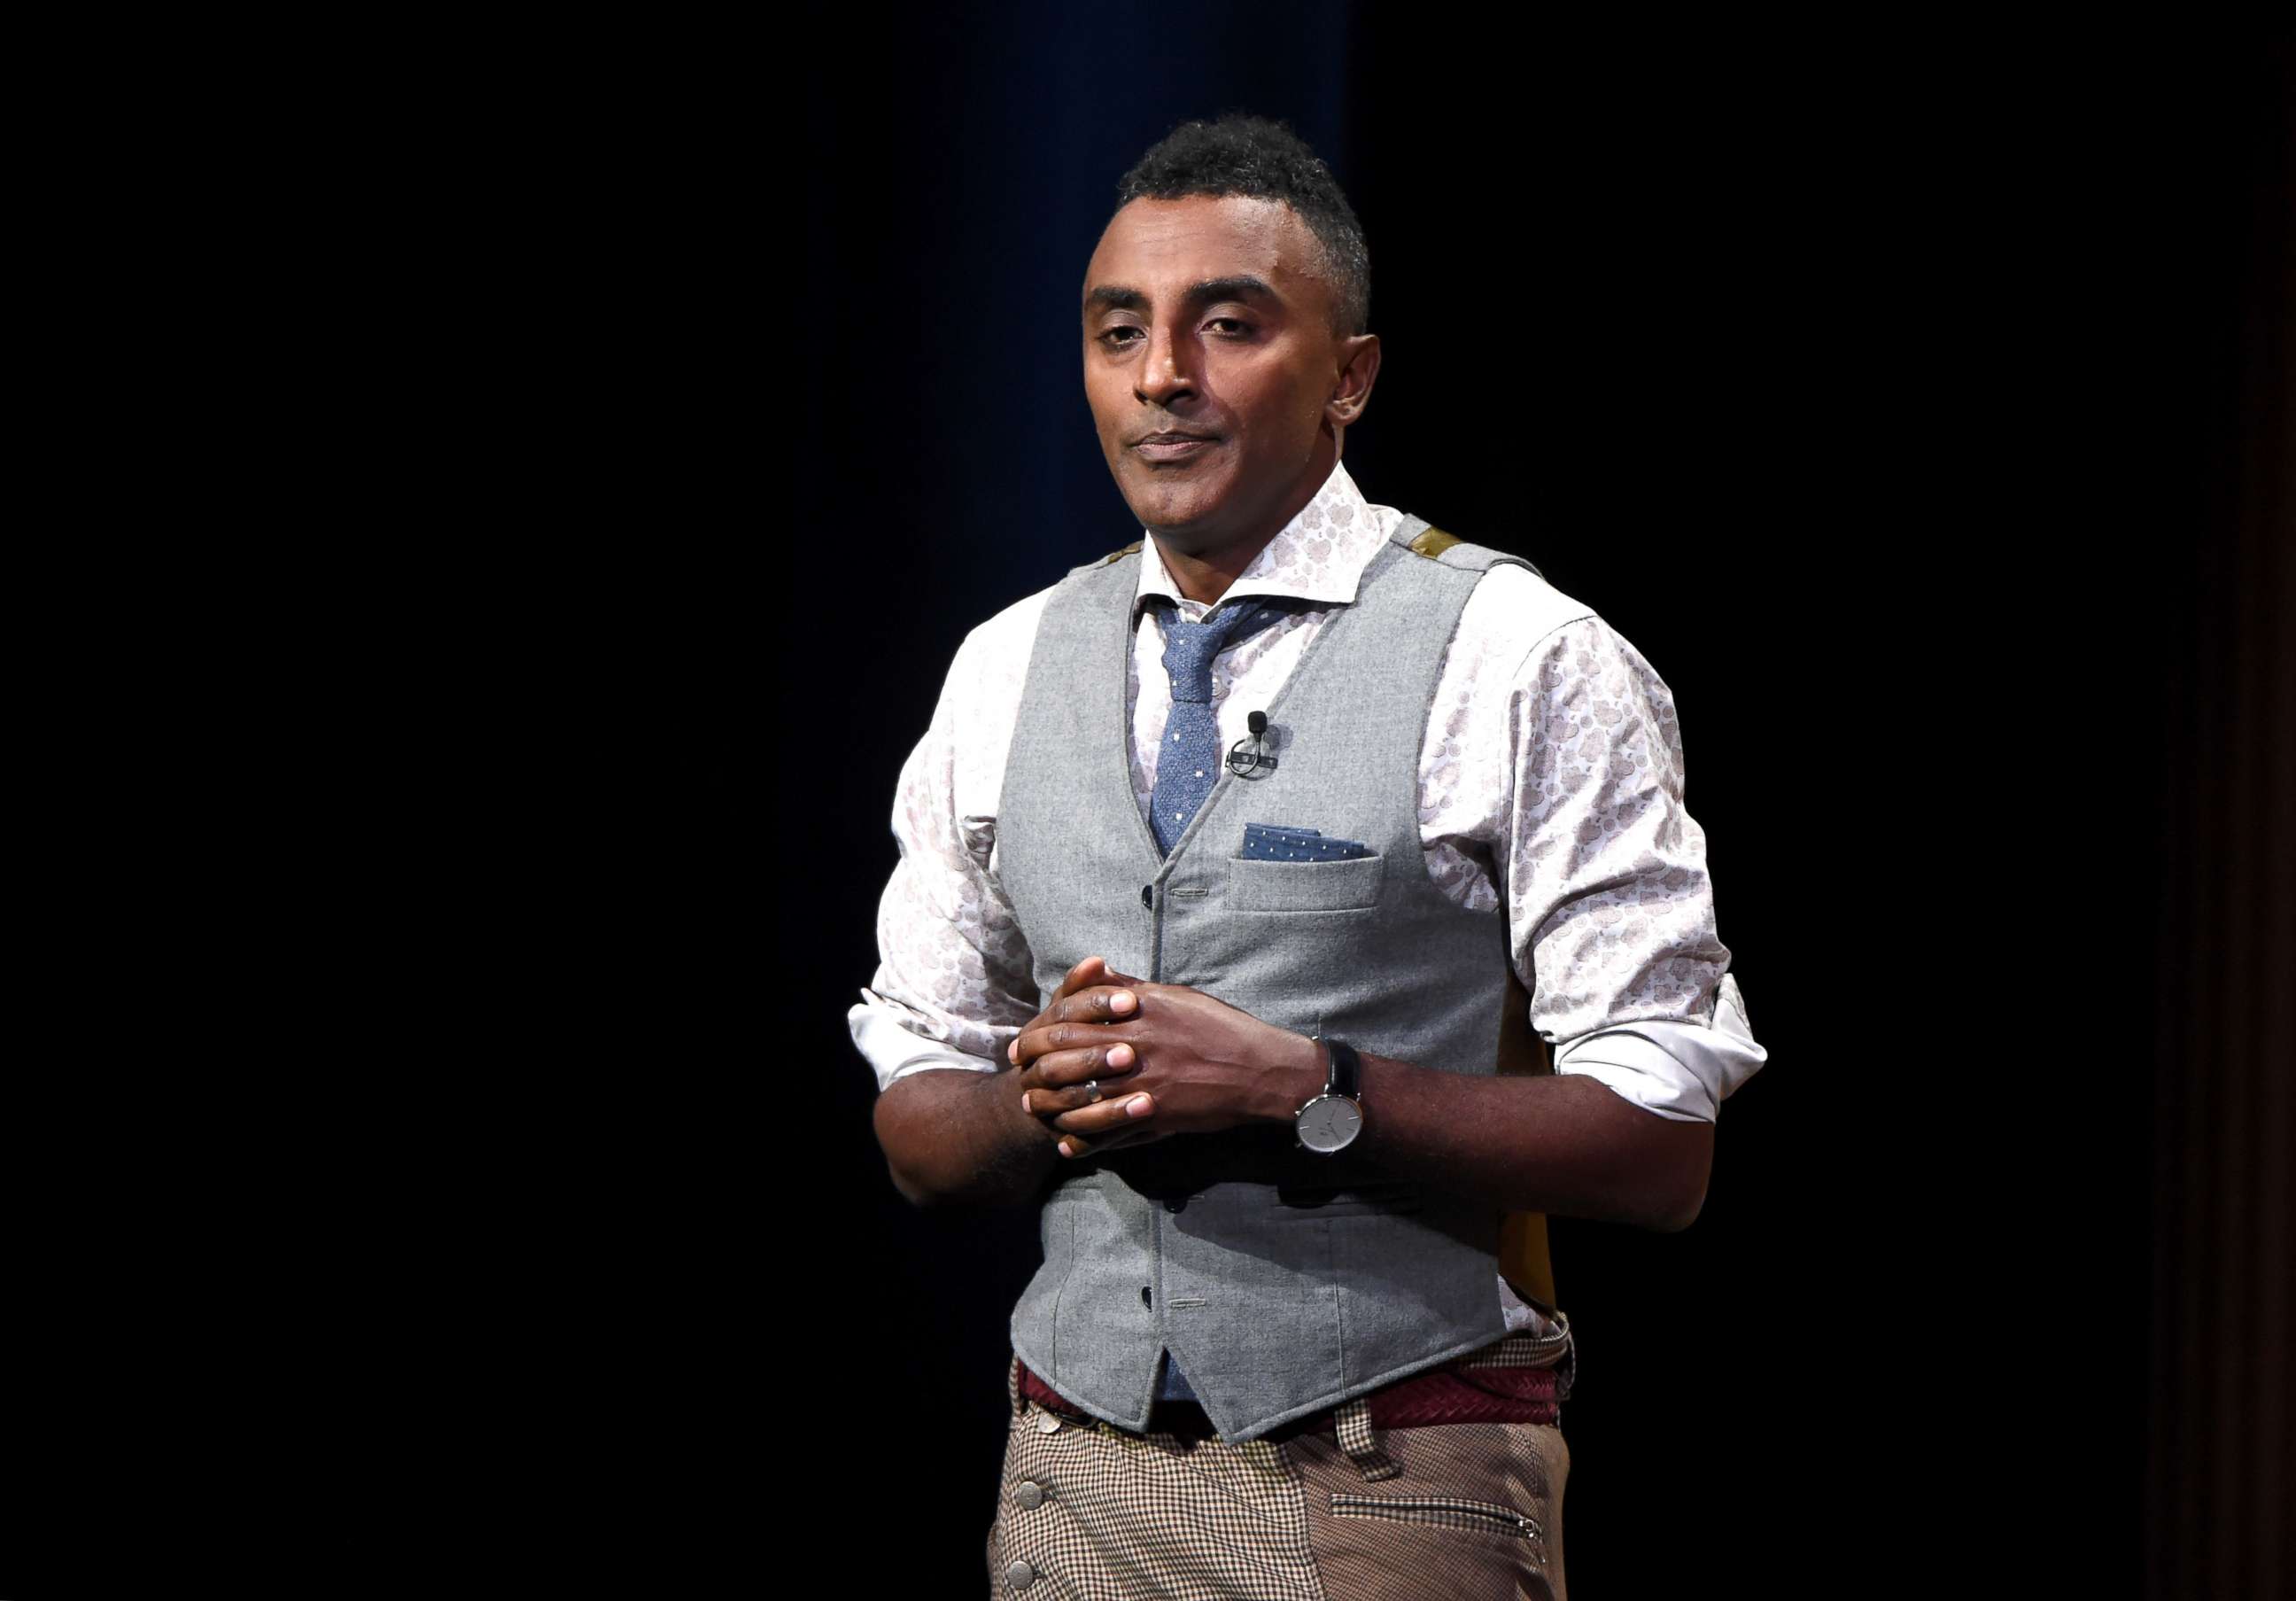 PHOTO: Chef/co-owner at Red Rooster Harlem, Marcus Samuelsson, speaks onstage during "Letter from Harlem: Investing in a Community" at the Vanity Fair New Establishment Summit at Yerba Buena Center for the Arts, Oct. 20, 2016, in San Francisco, Calif.  